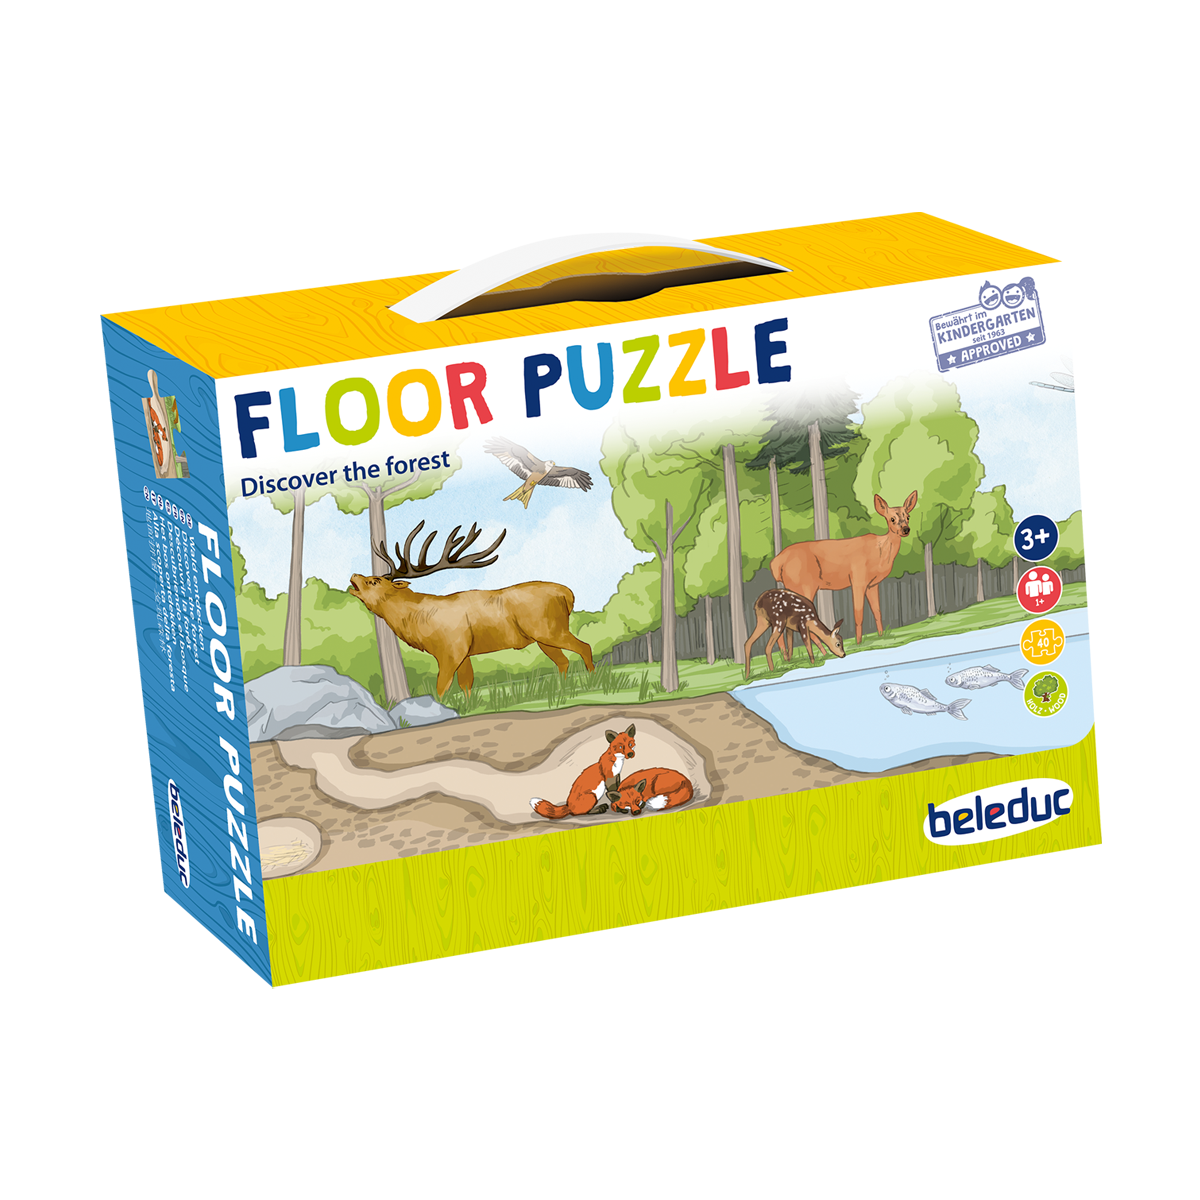 Floor Puzzle "Discover the Forest"